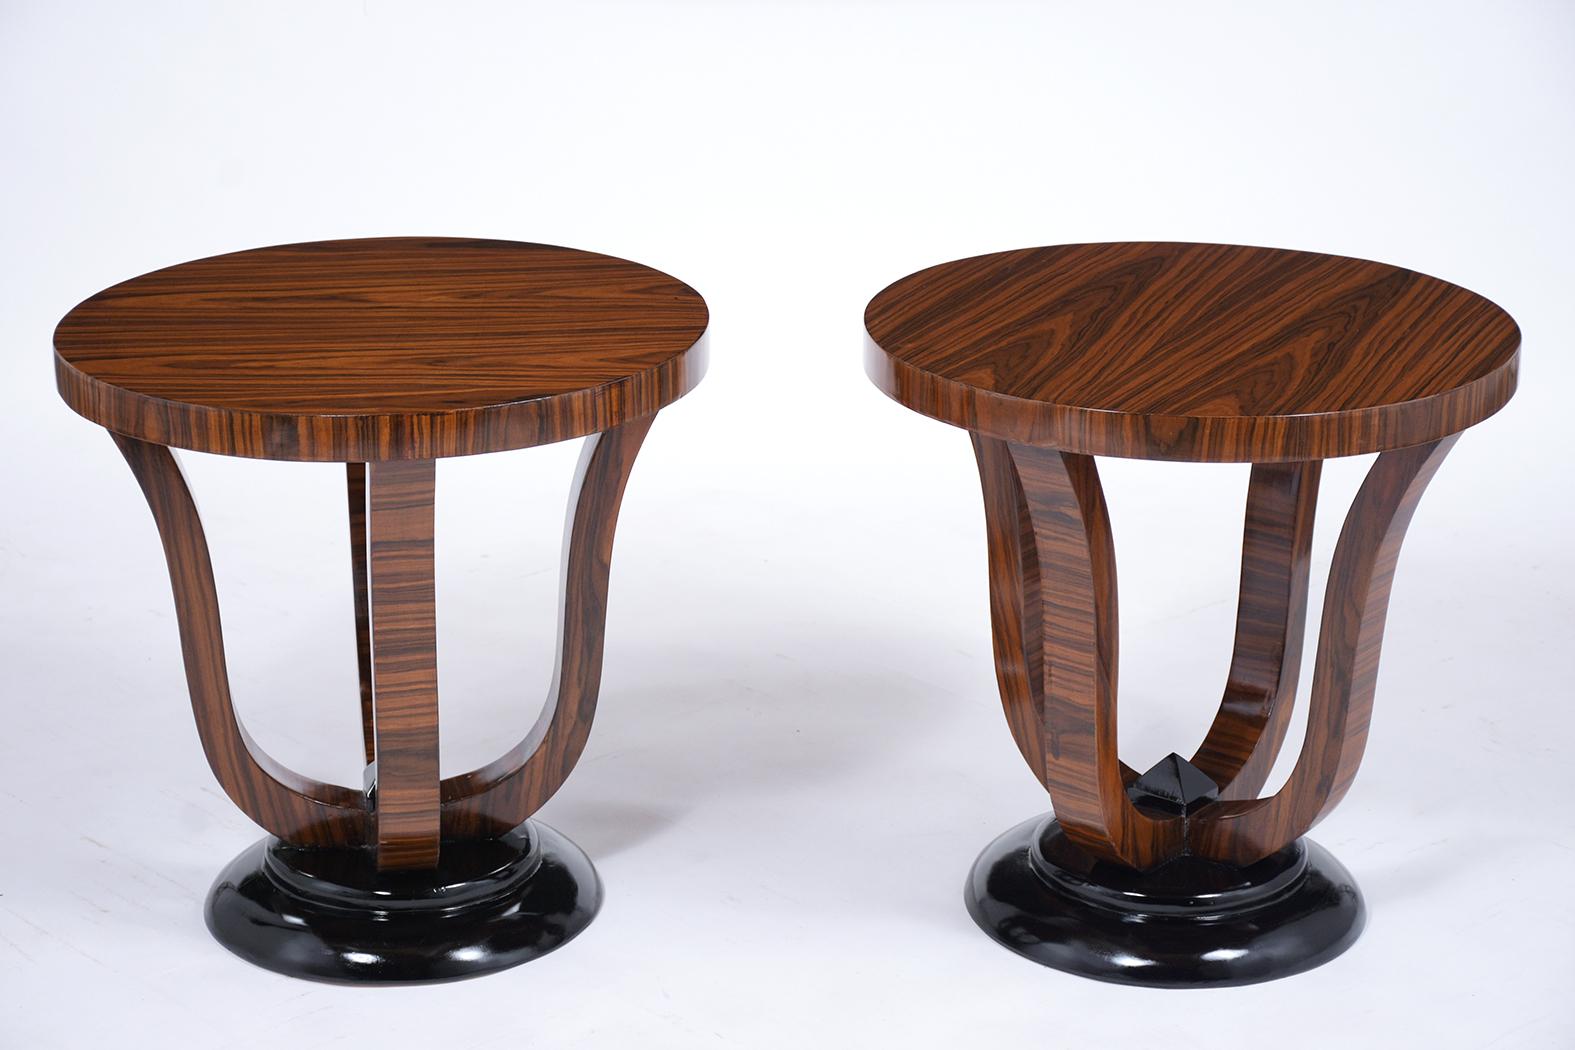 This pair of French art deco macassar side tables are in great condition have ebonized details and a newly lacquered finish. These end tables are covered in their original macassar veneer, circular round top, and rests on a sturdy pedestal base with